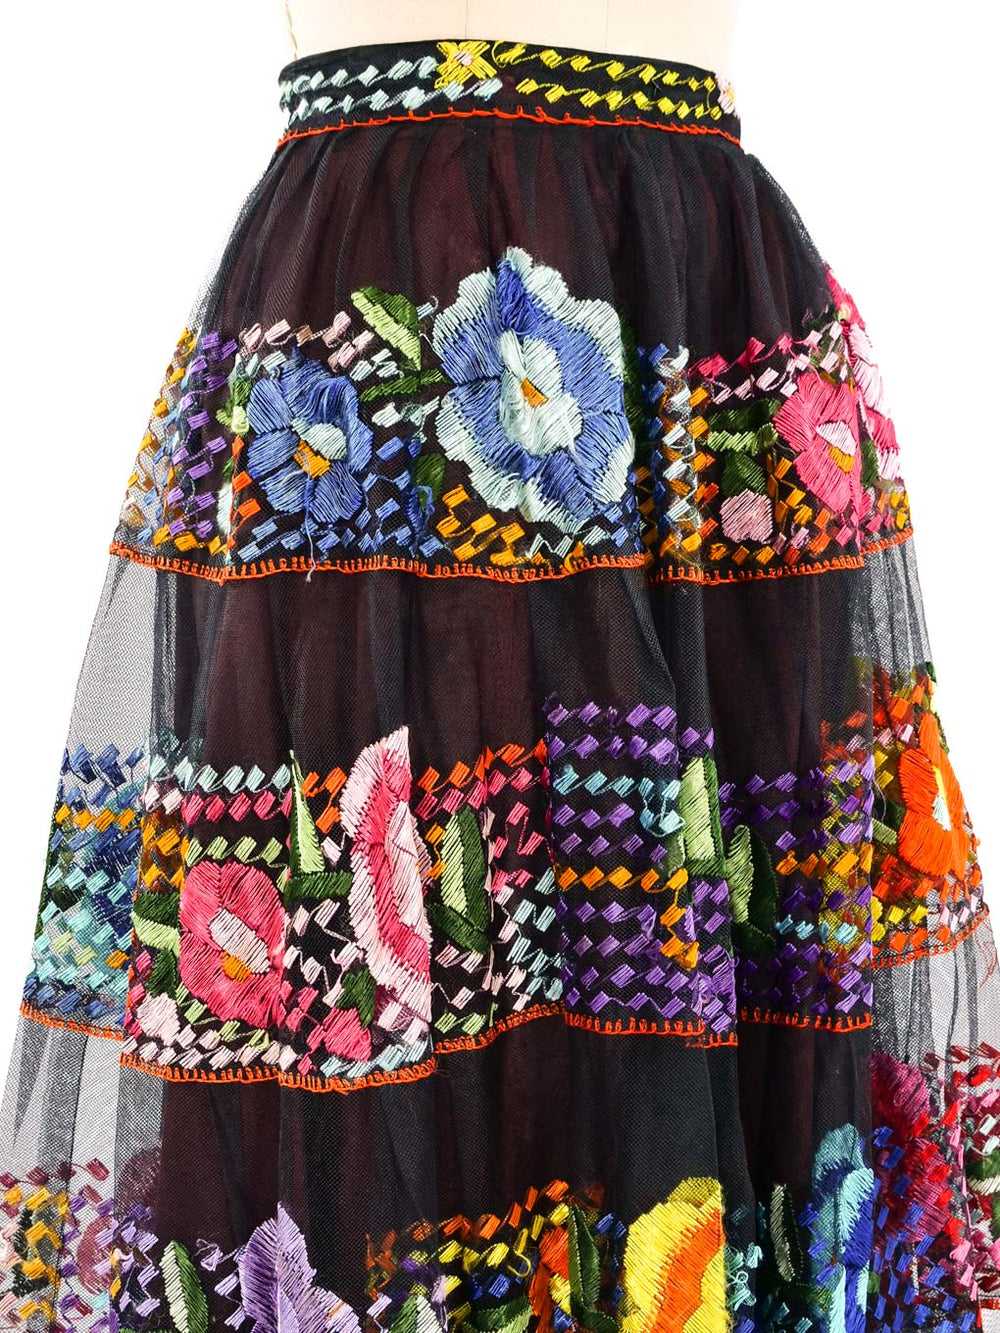 Hand Embroidered Mexican Net Skirt - image 2